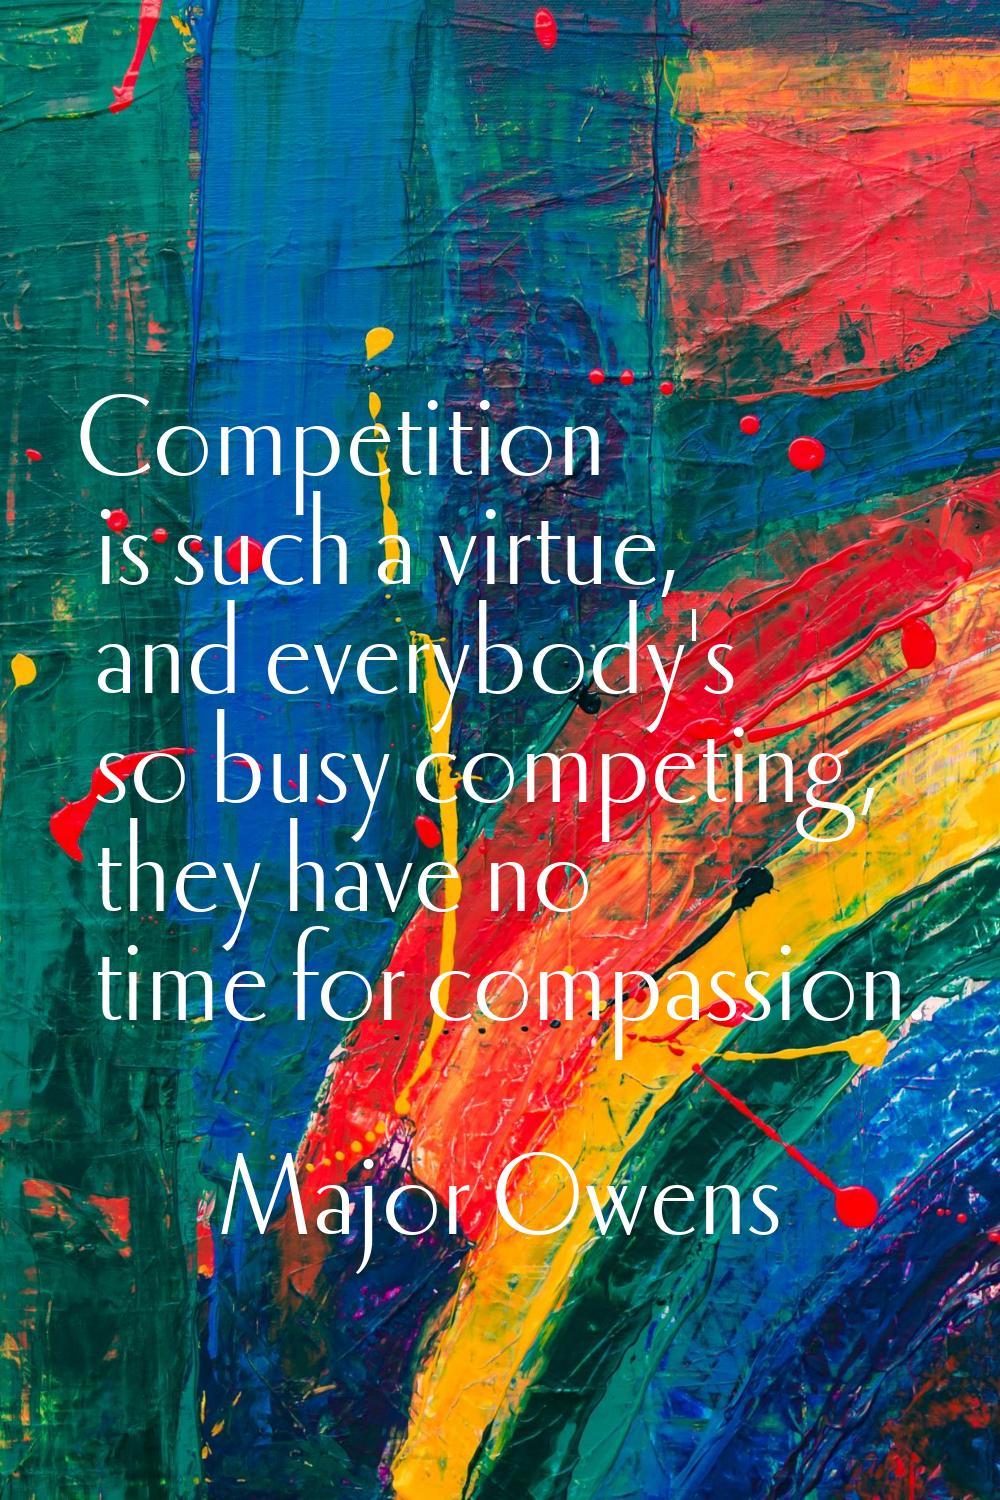 Competition is such a virtue, and everybody's so busy competing, they have no time for compassion.